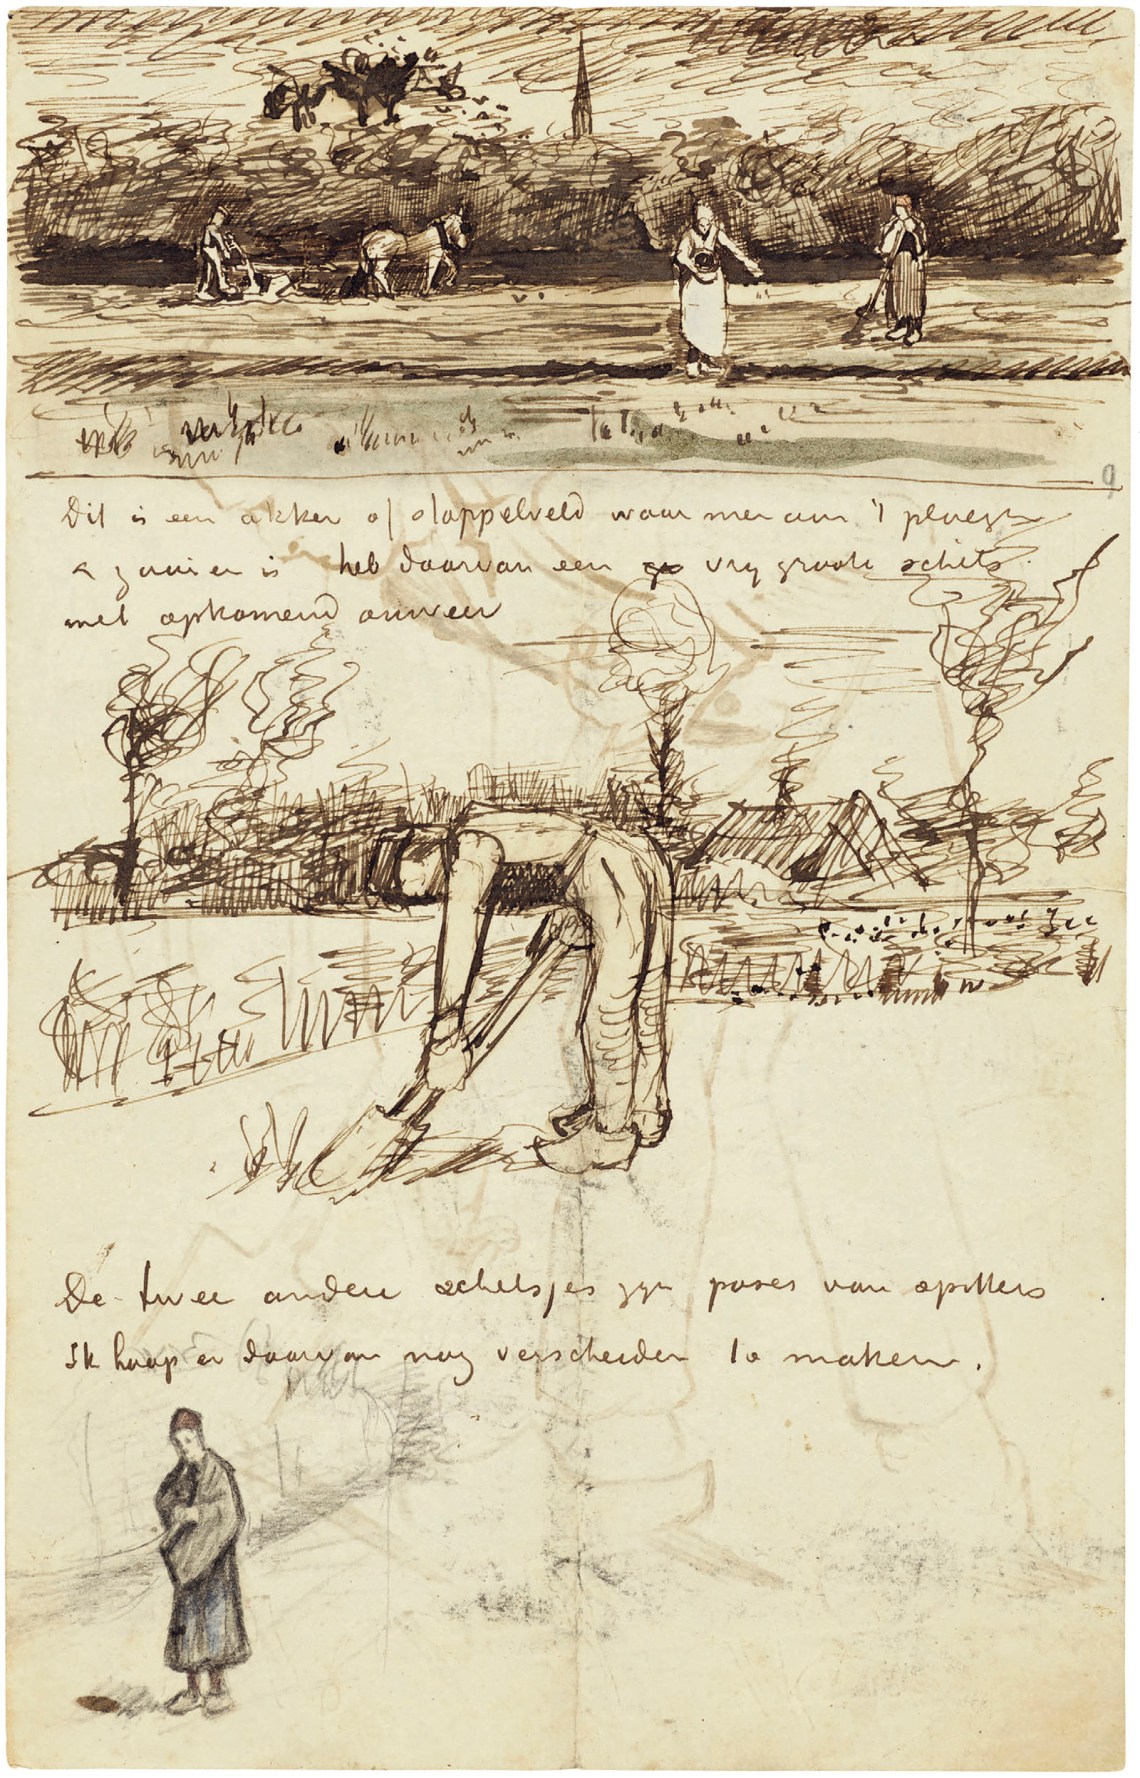 A letter from Vincent van Gogh to Theo van Gogh, September 1881